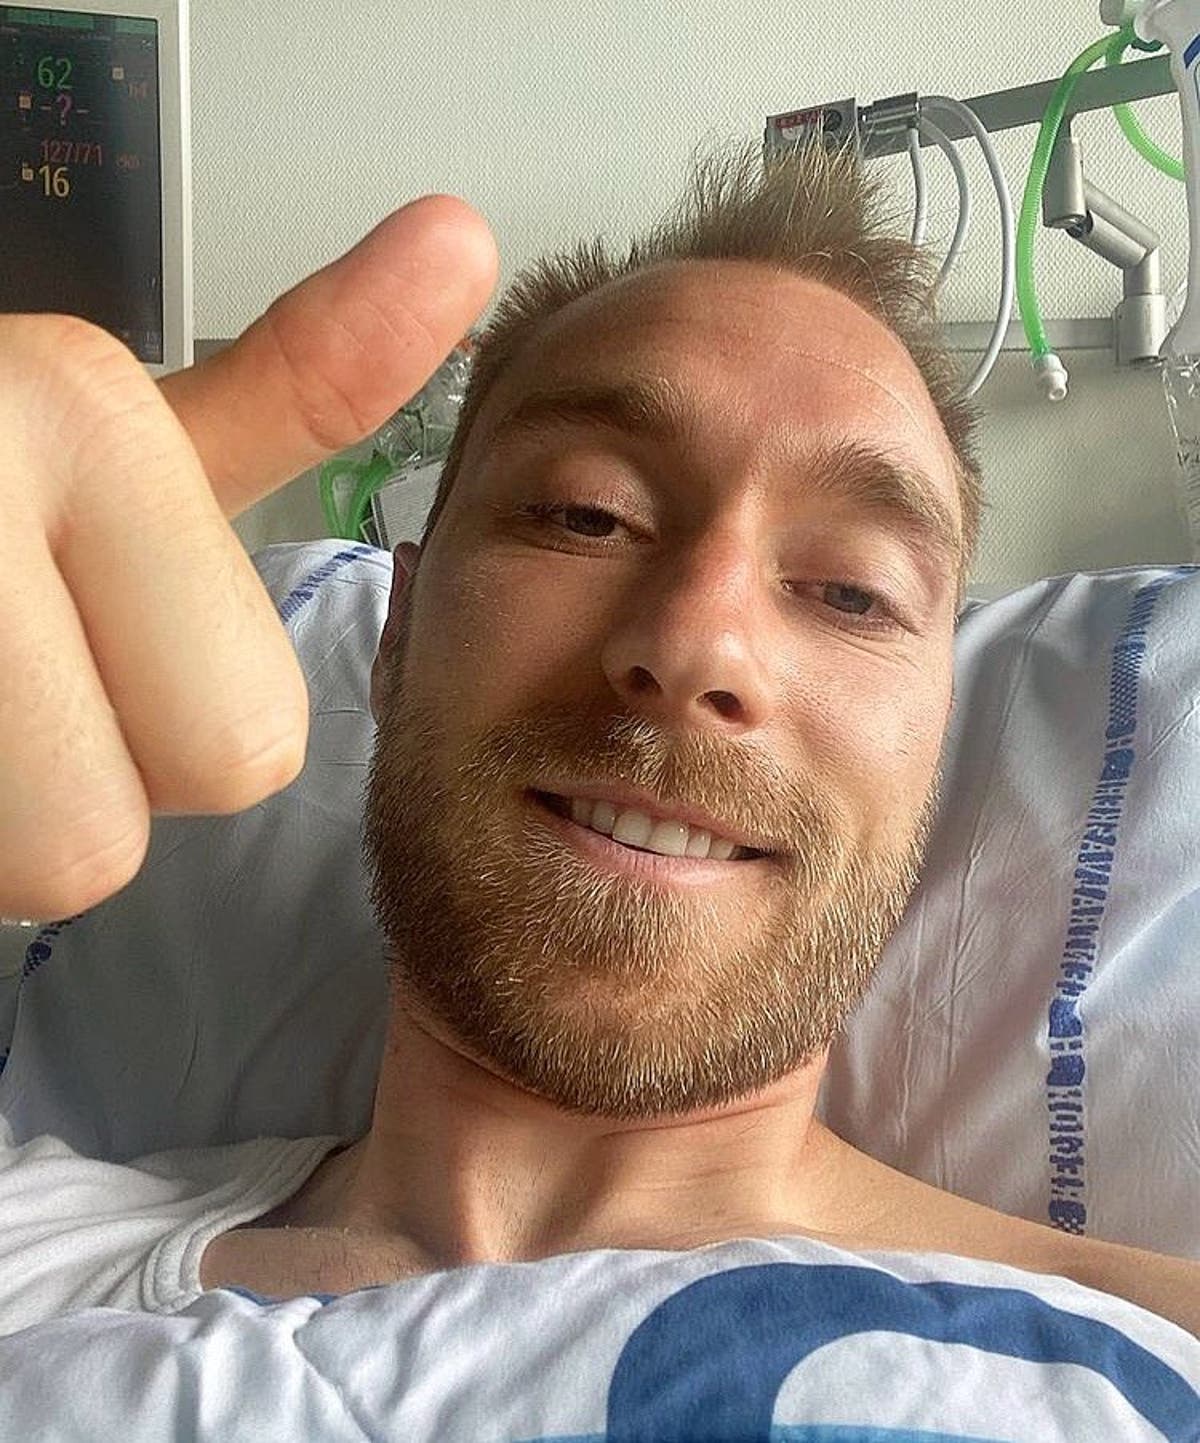 Christian Eriksen shares message from hospital bed after cardiac arrest during Euro 2020 | The Independent